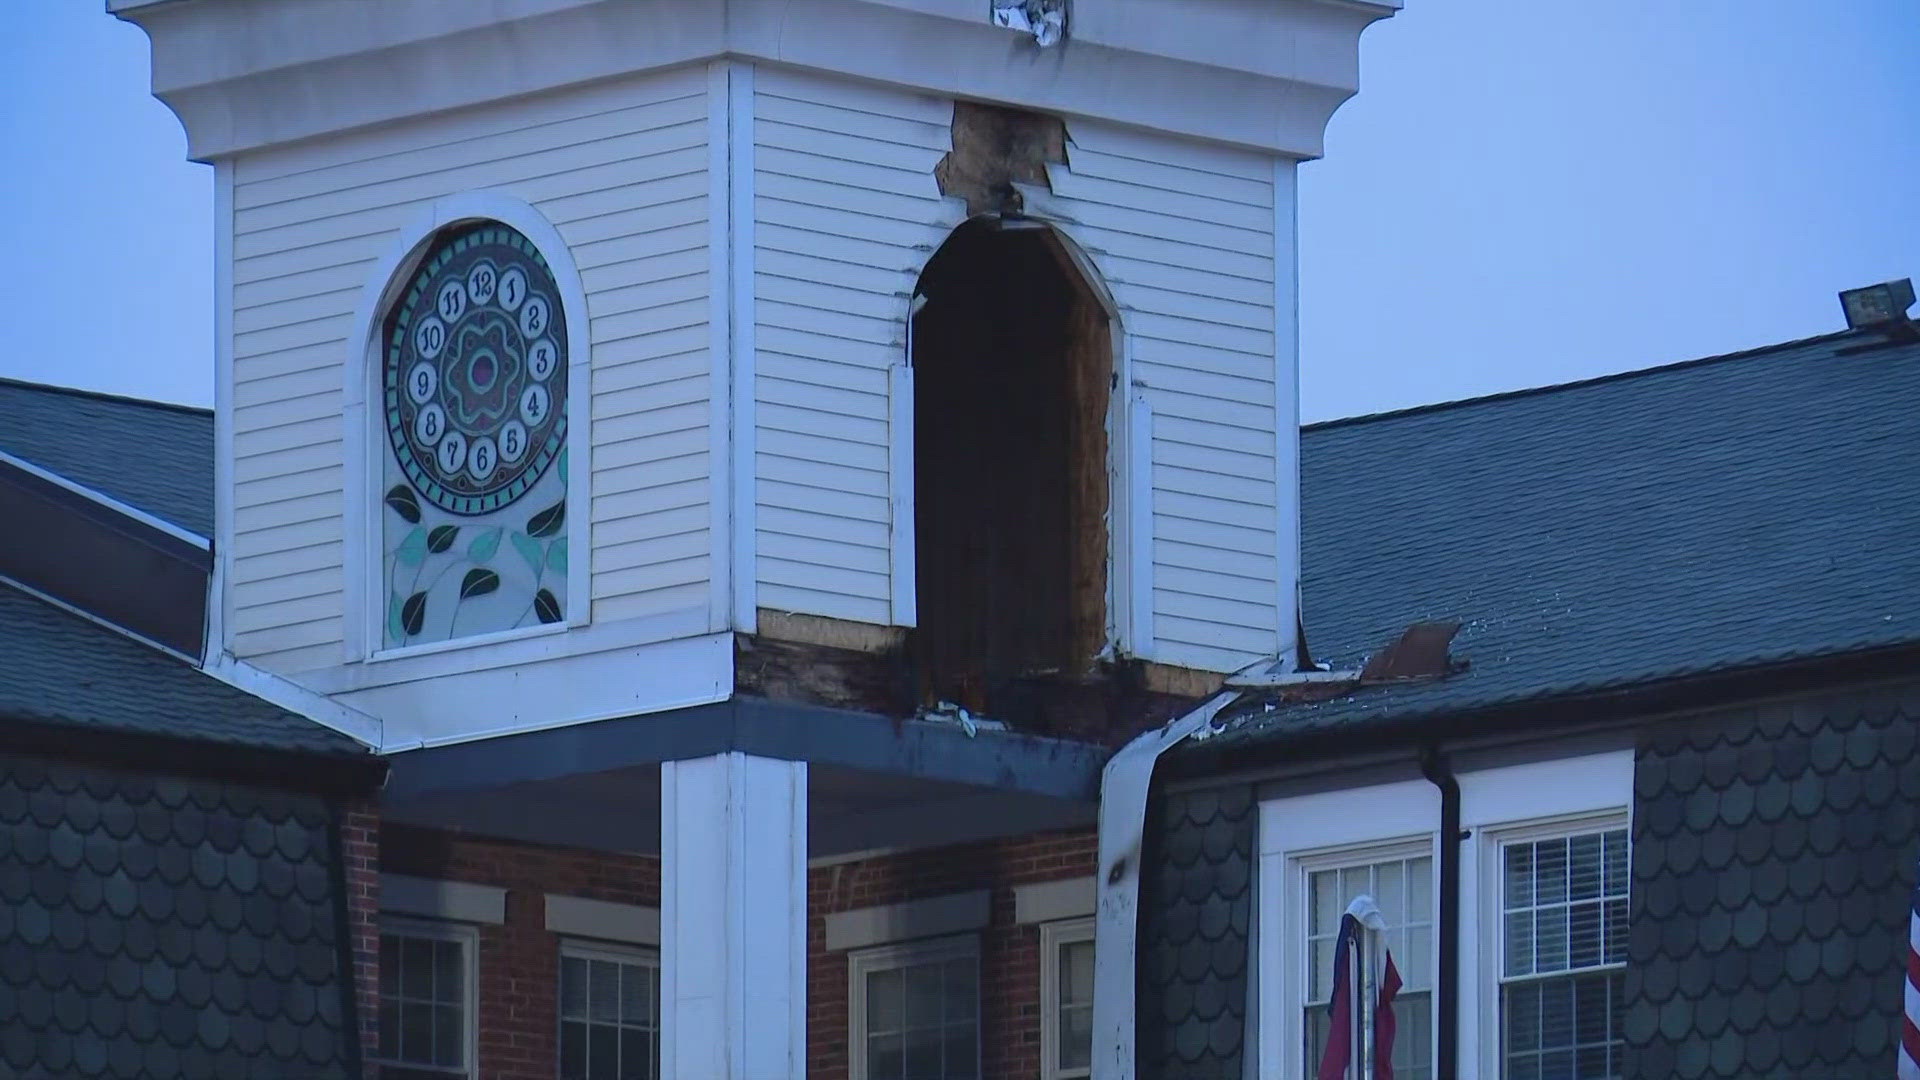 The clocktower at Three Flags Center in St. Charles sustained fire damage overnight. It could be because of a possible lightning strike